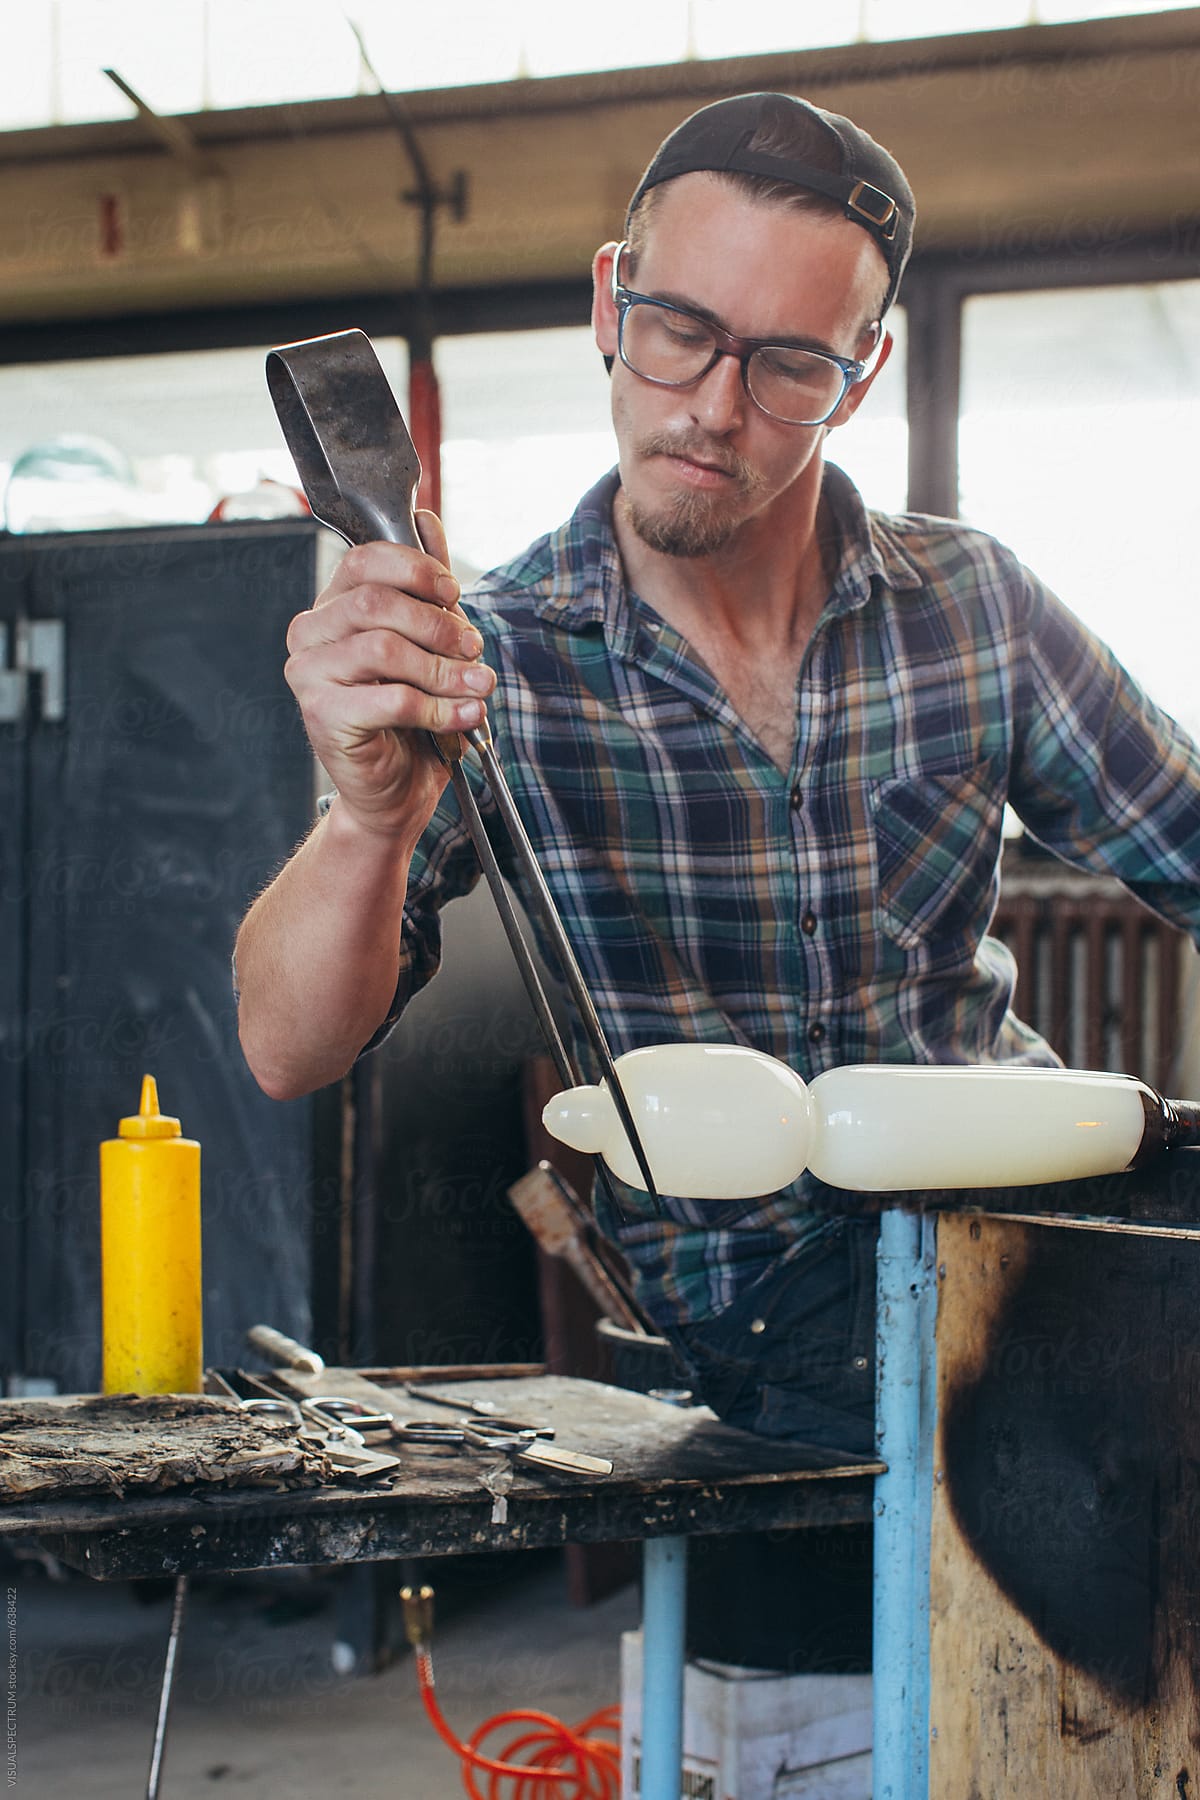 Artisan Glass Workshop - Portrait of Male Hipster Artist Shaping Hot Glass With Jacks